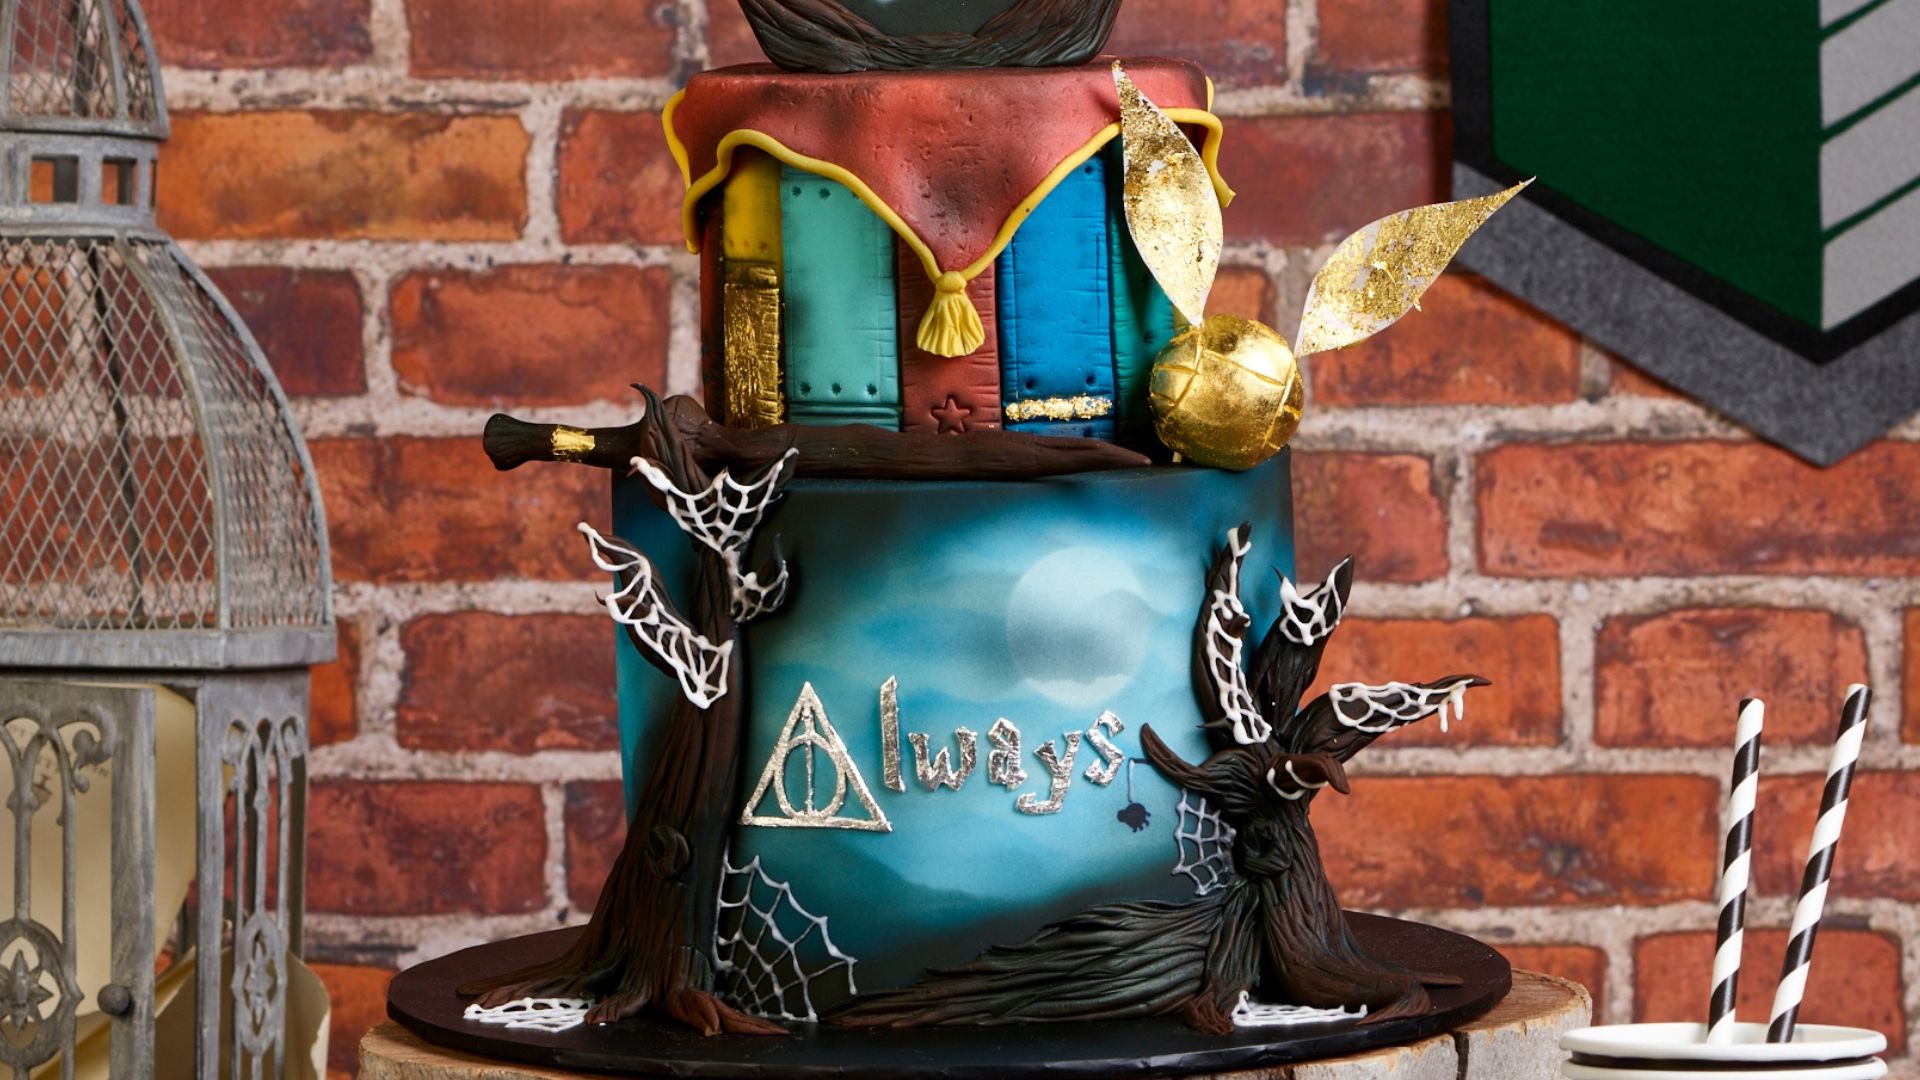 2 Tier Harry Potter themed cake with quidditch, magic wand and forbidden forest fondant decorations